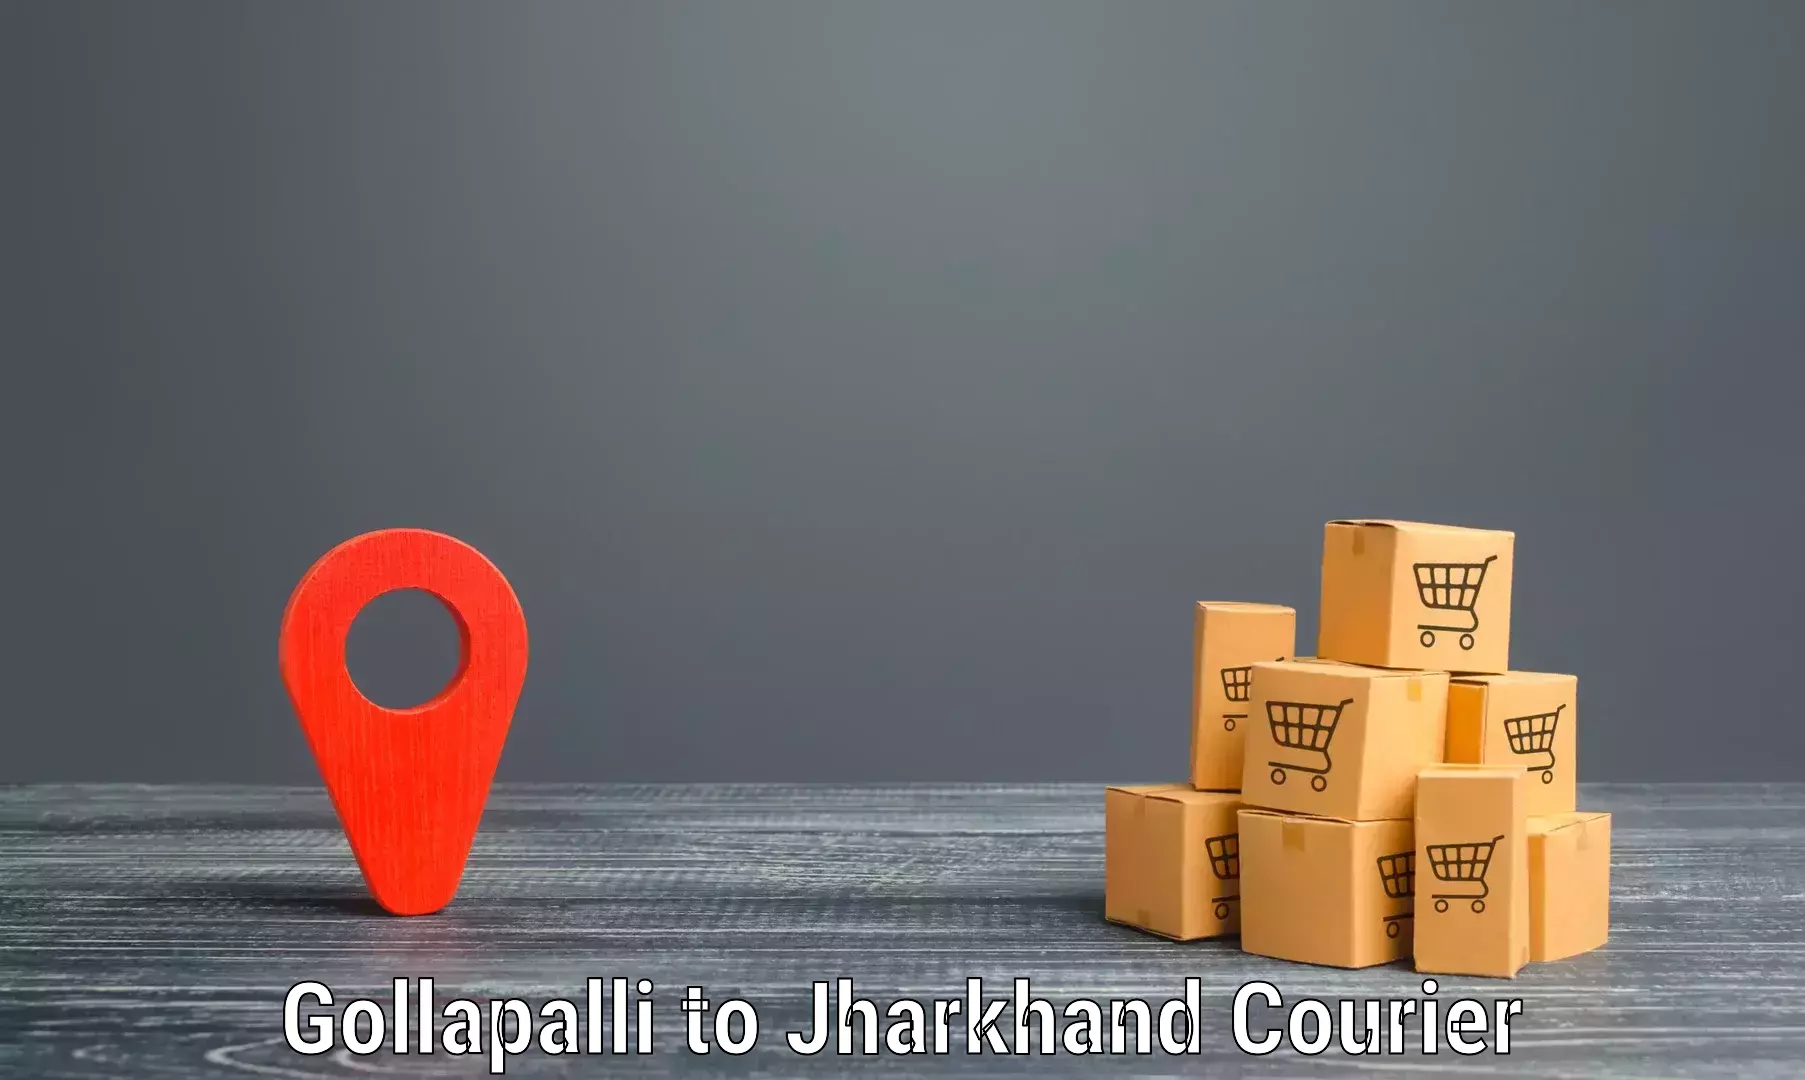 Trackable shipping service Gollapalli to Koderma